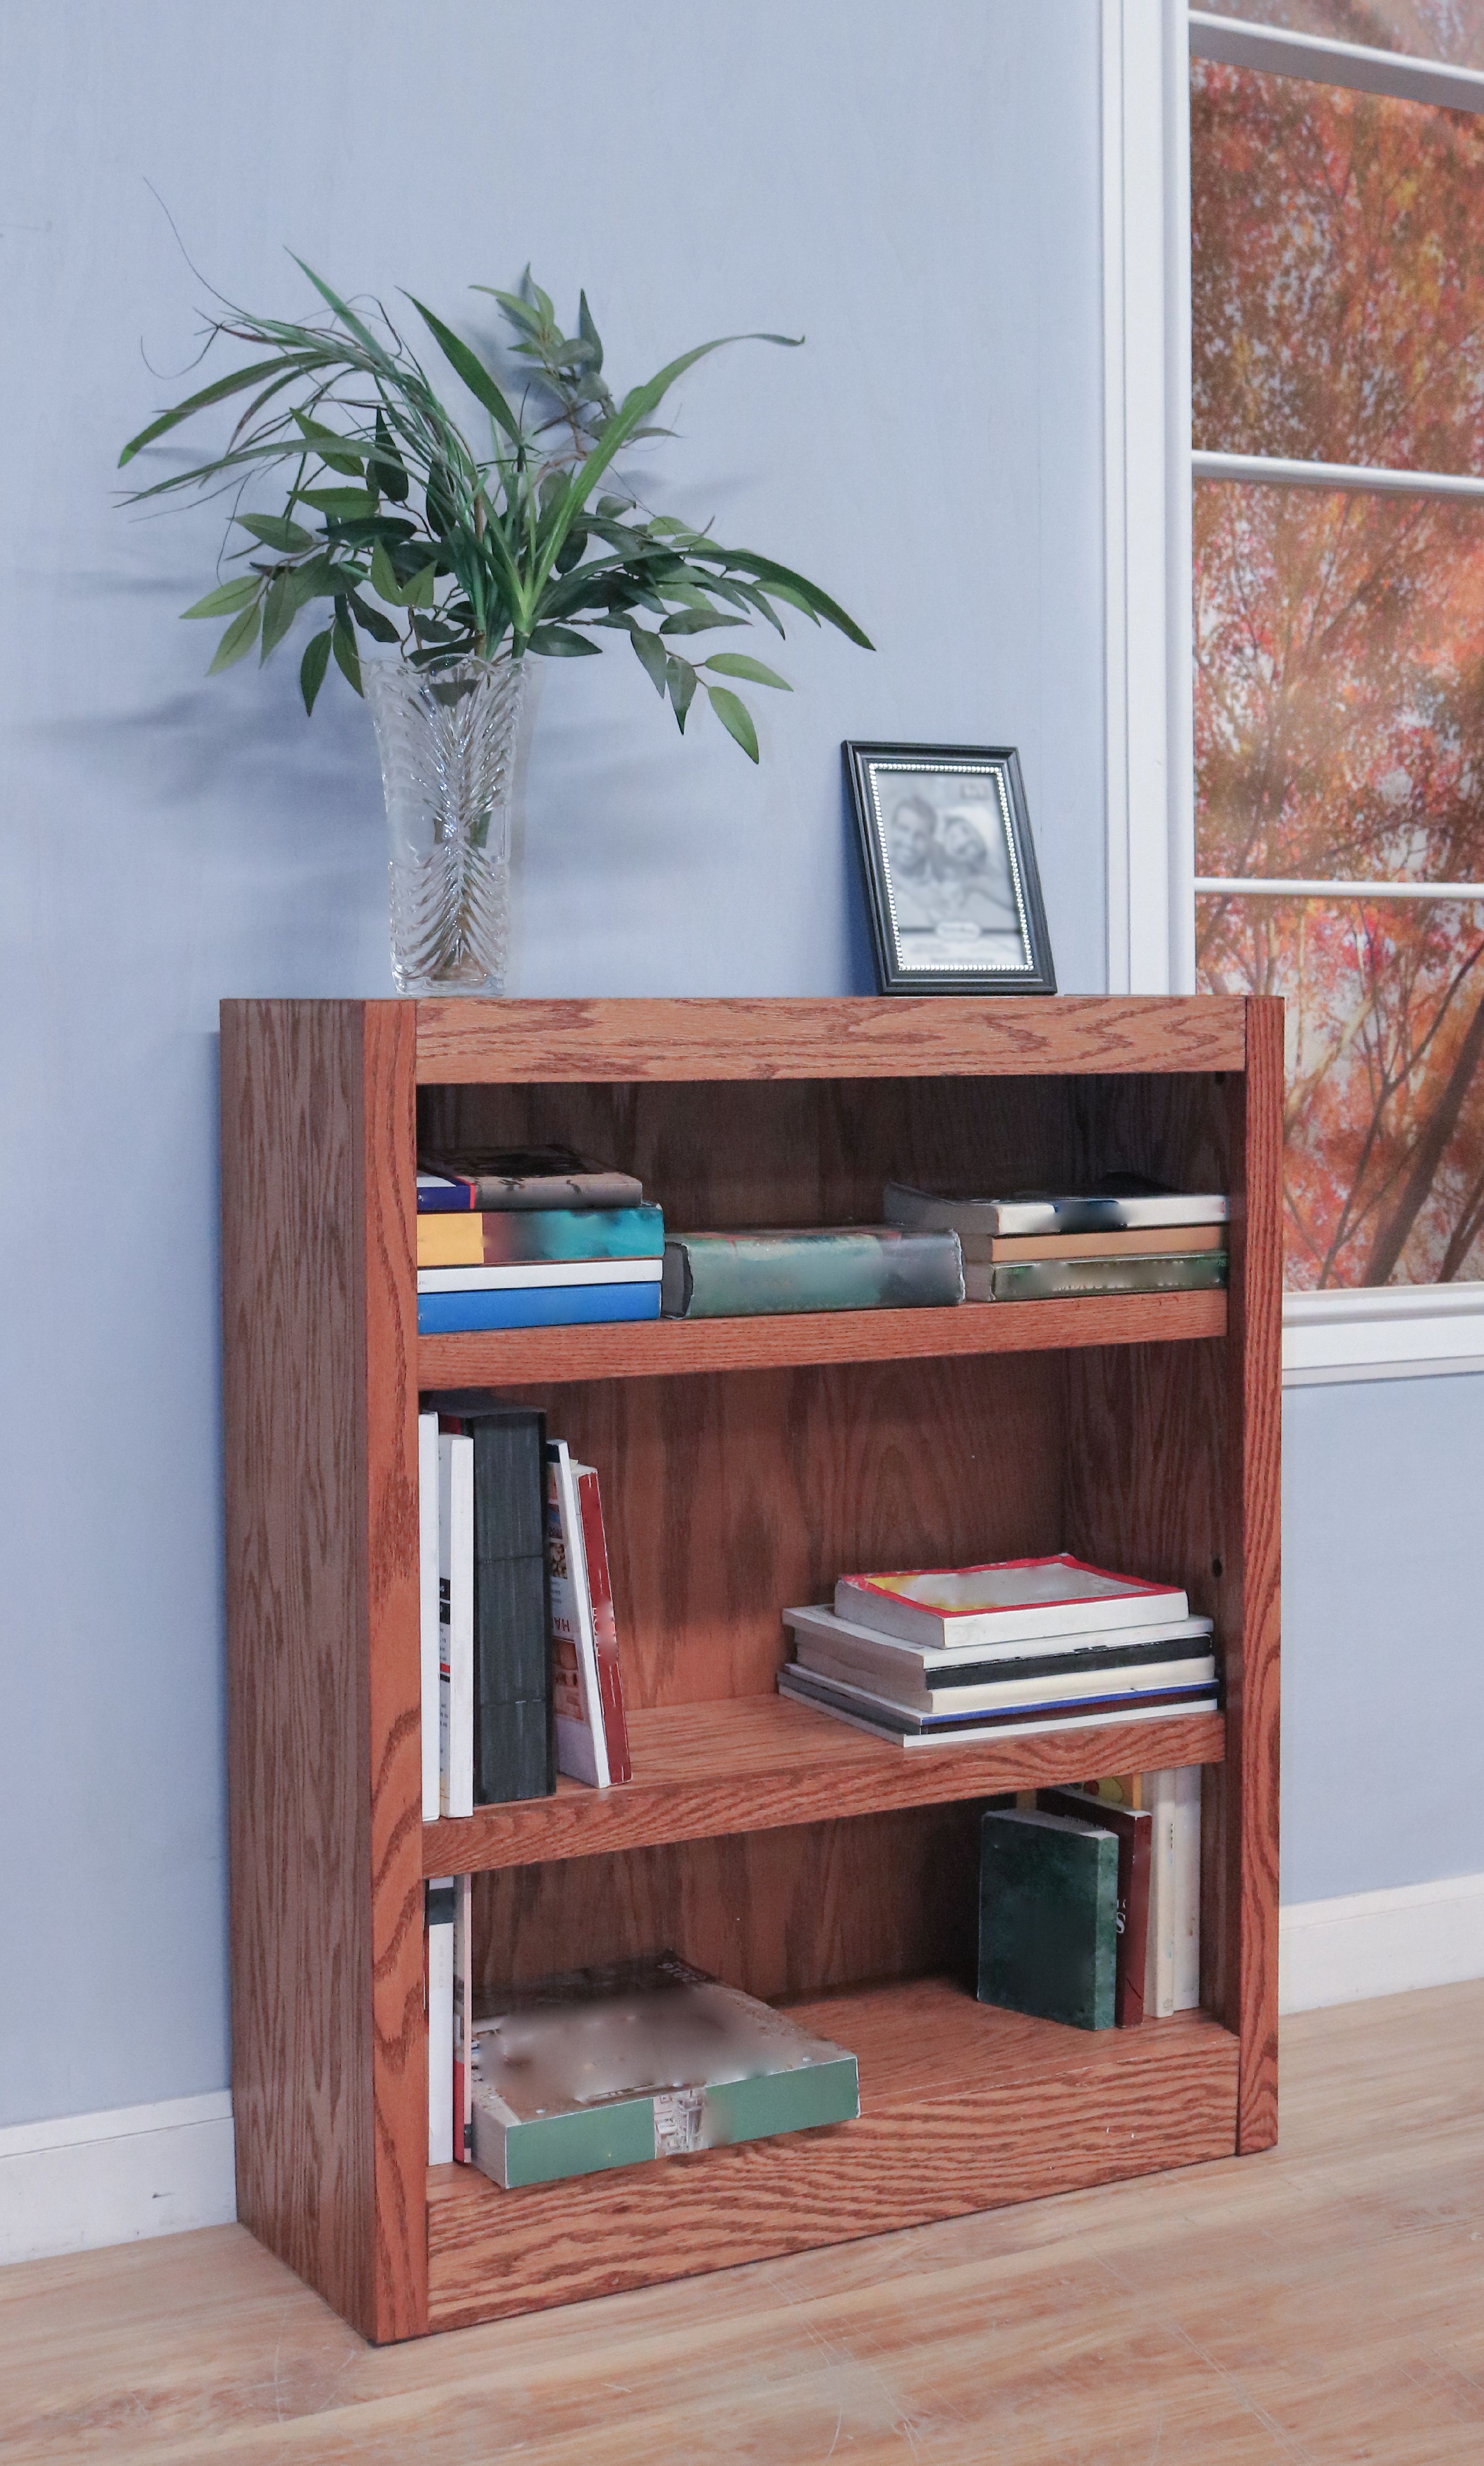 Concepts in Wood 3 Shelf Wood Bookcase, 36 inch Tall - Oak Finish - image 4 of 6